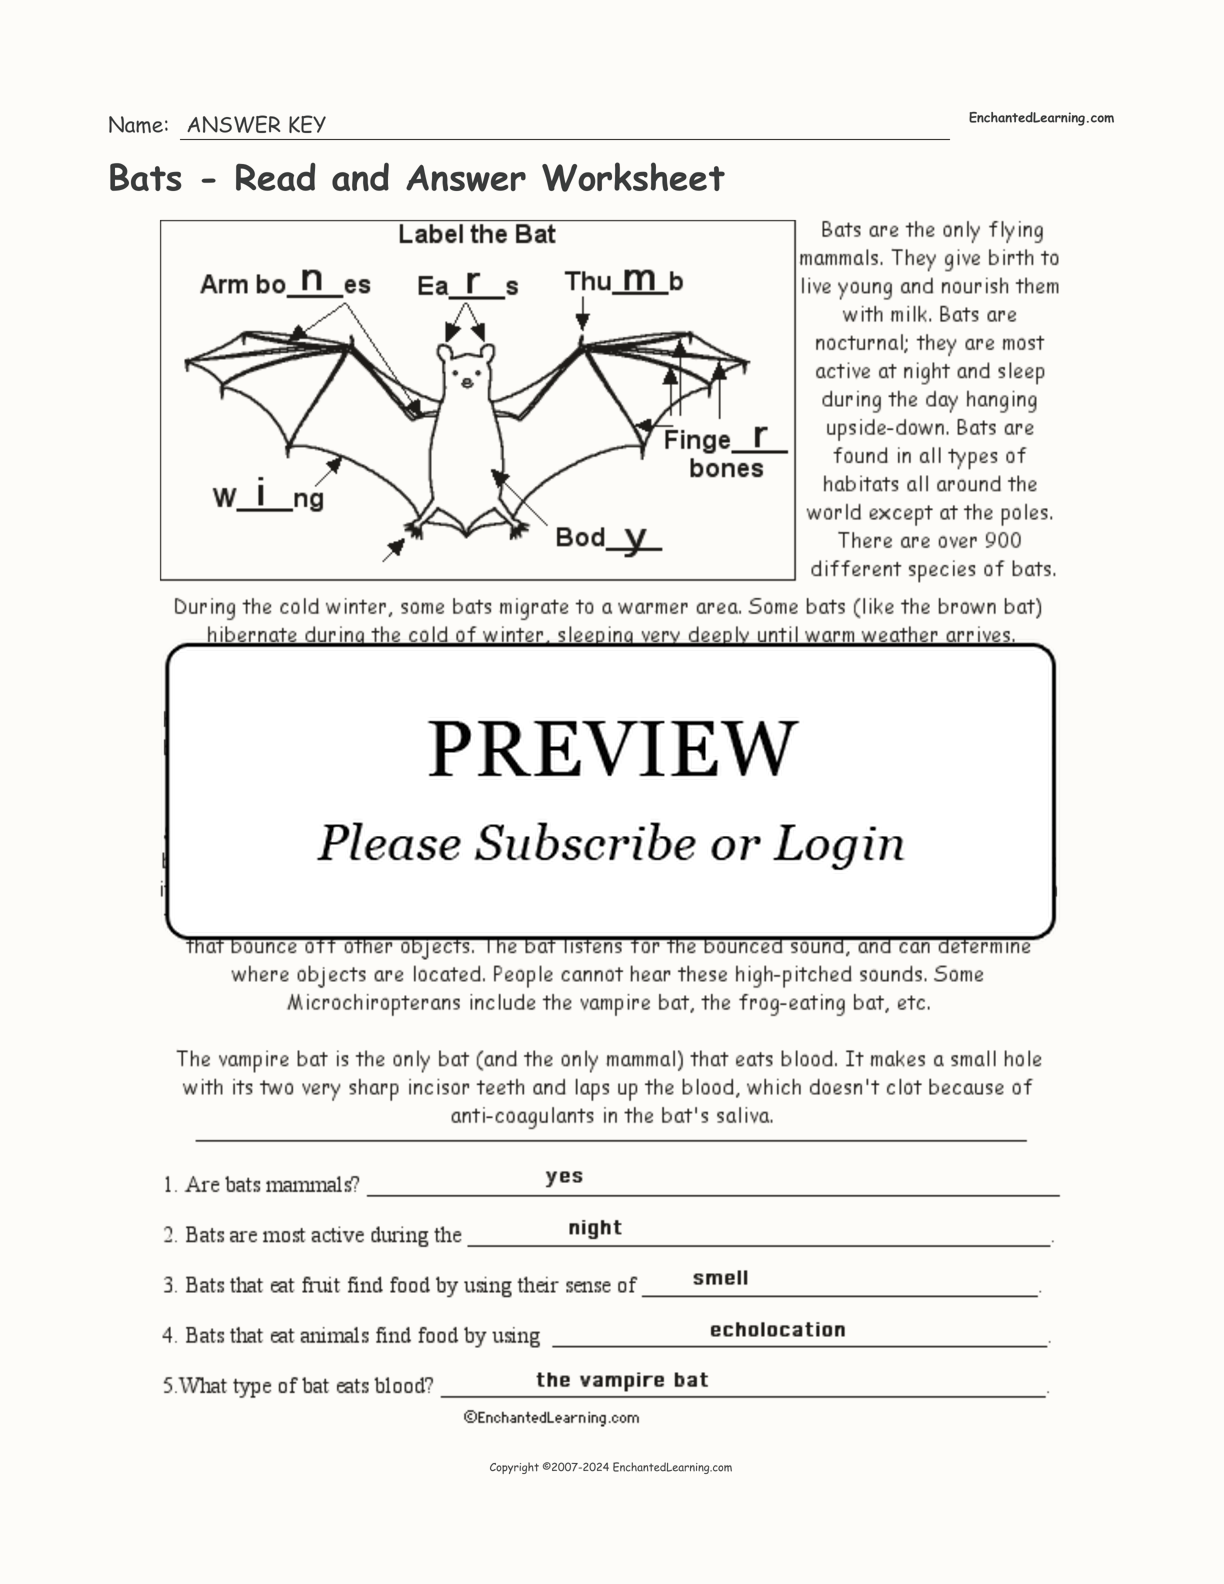 Bats - Read and Answer Worksheet interactive worksheet page 2